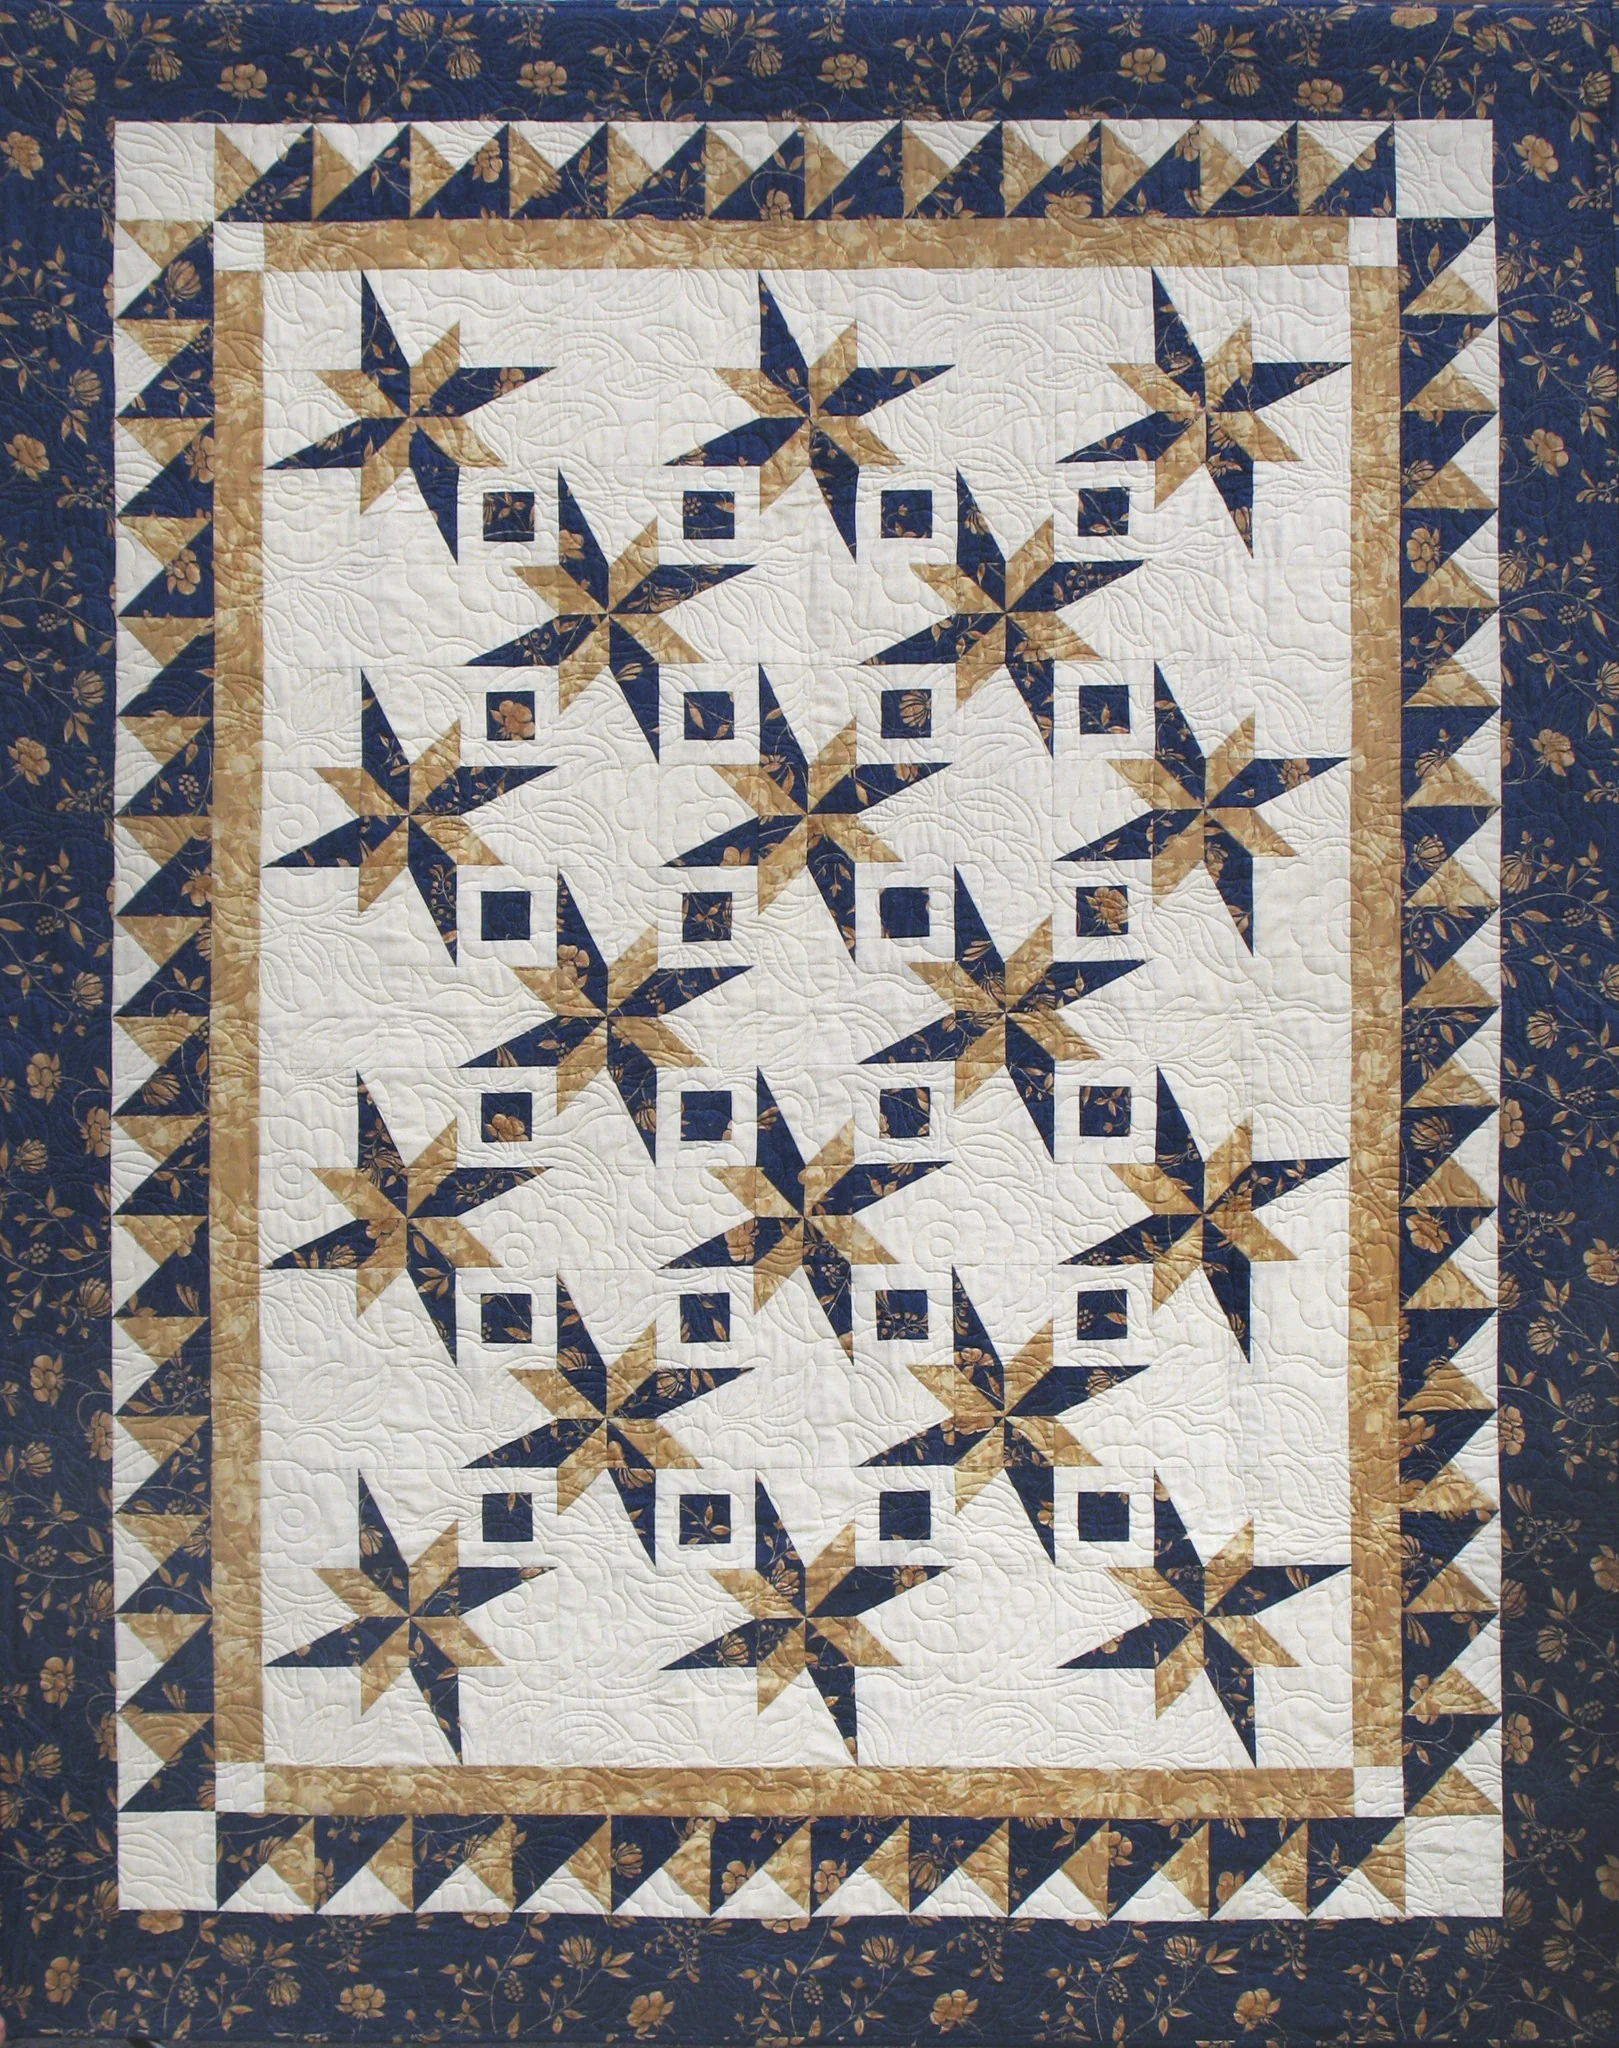 Studio 180 Design New Year's Star Quilting Pattern DTP009 for Sale at World Weidner